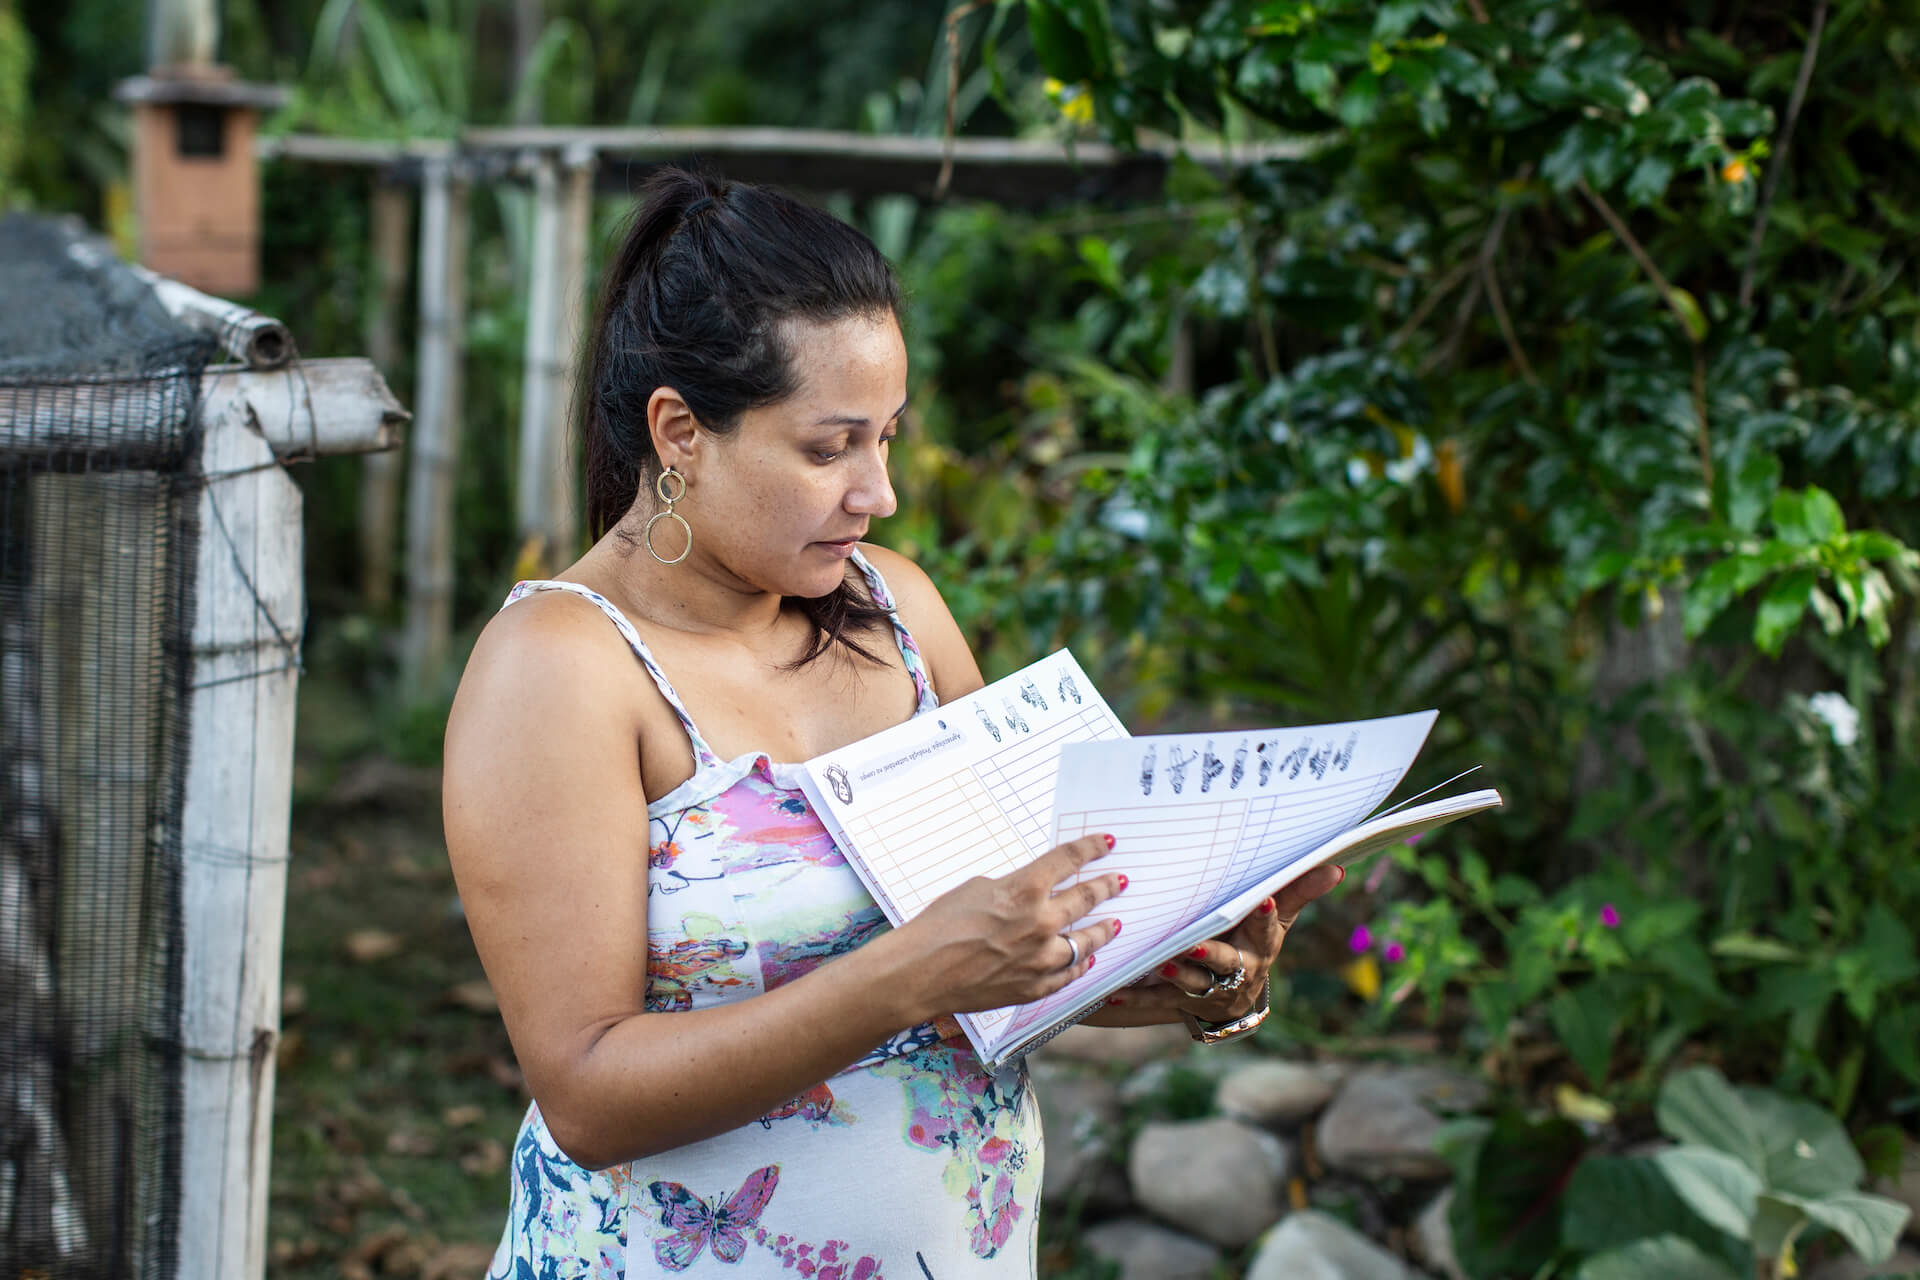 Janette Dantas, 33, pictured seven months pregnant, is one of several women farmers in Brazil who are leading a quiet revolution by logging their produce. The simple method fights gender bias in censuses and helps raise the profile of women vital to the country’s farms. Photo: UN Women/Lianne Milton